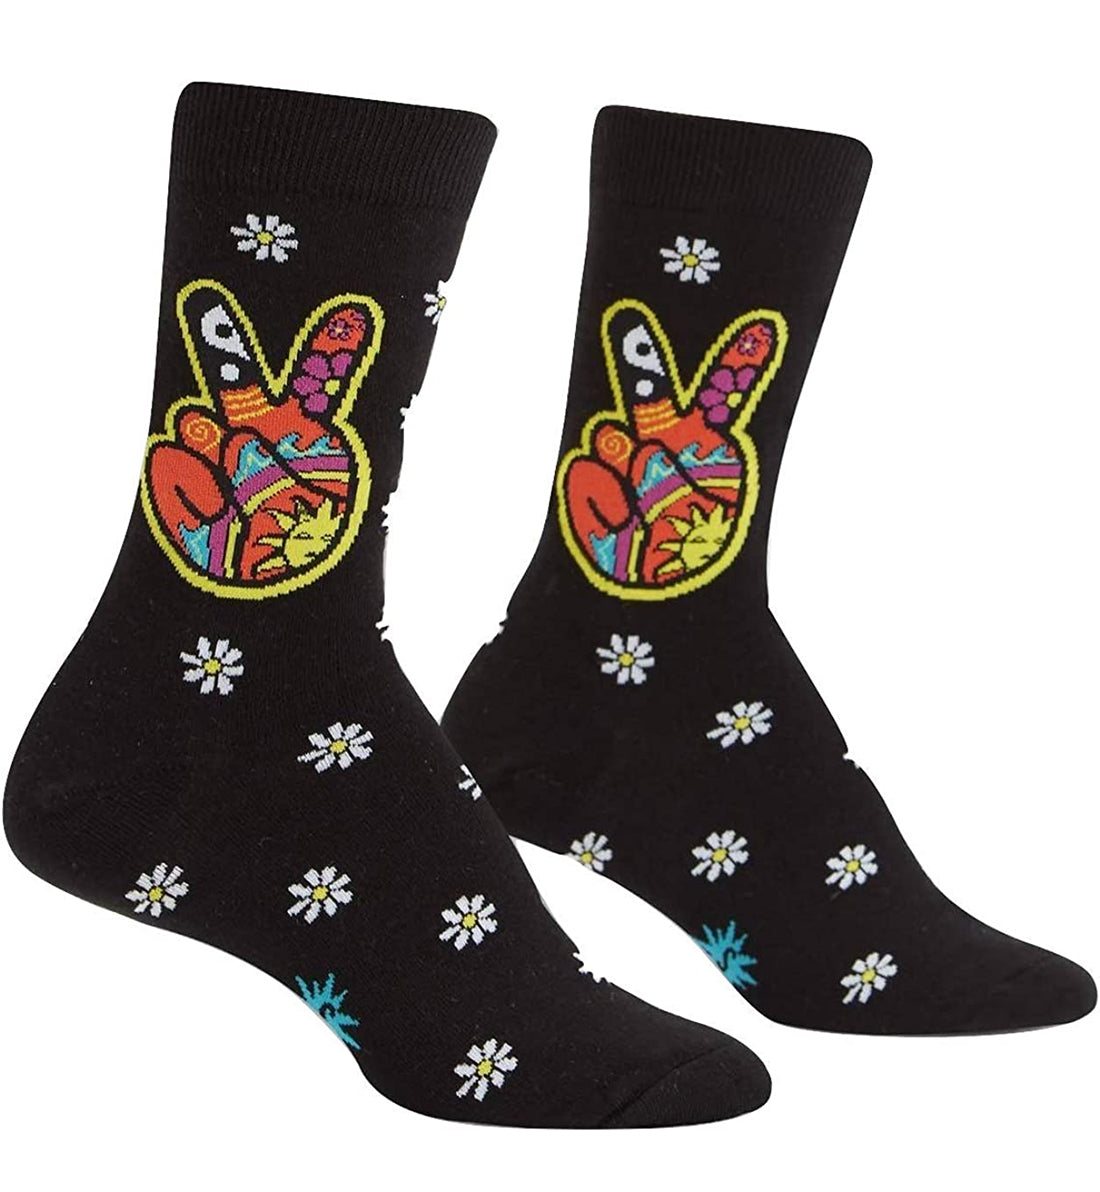 SOCK it to me Women's Crew Socks (w0202),Dream of the '90s - Dream of the '90s,One Size